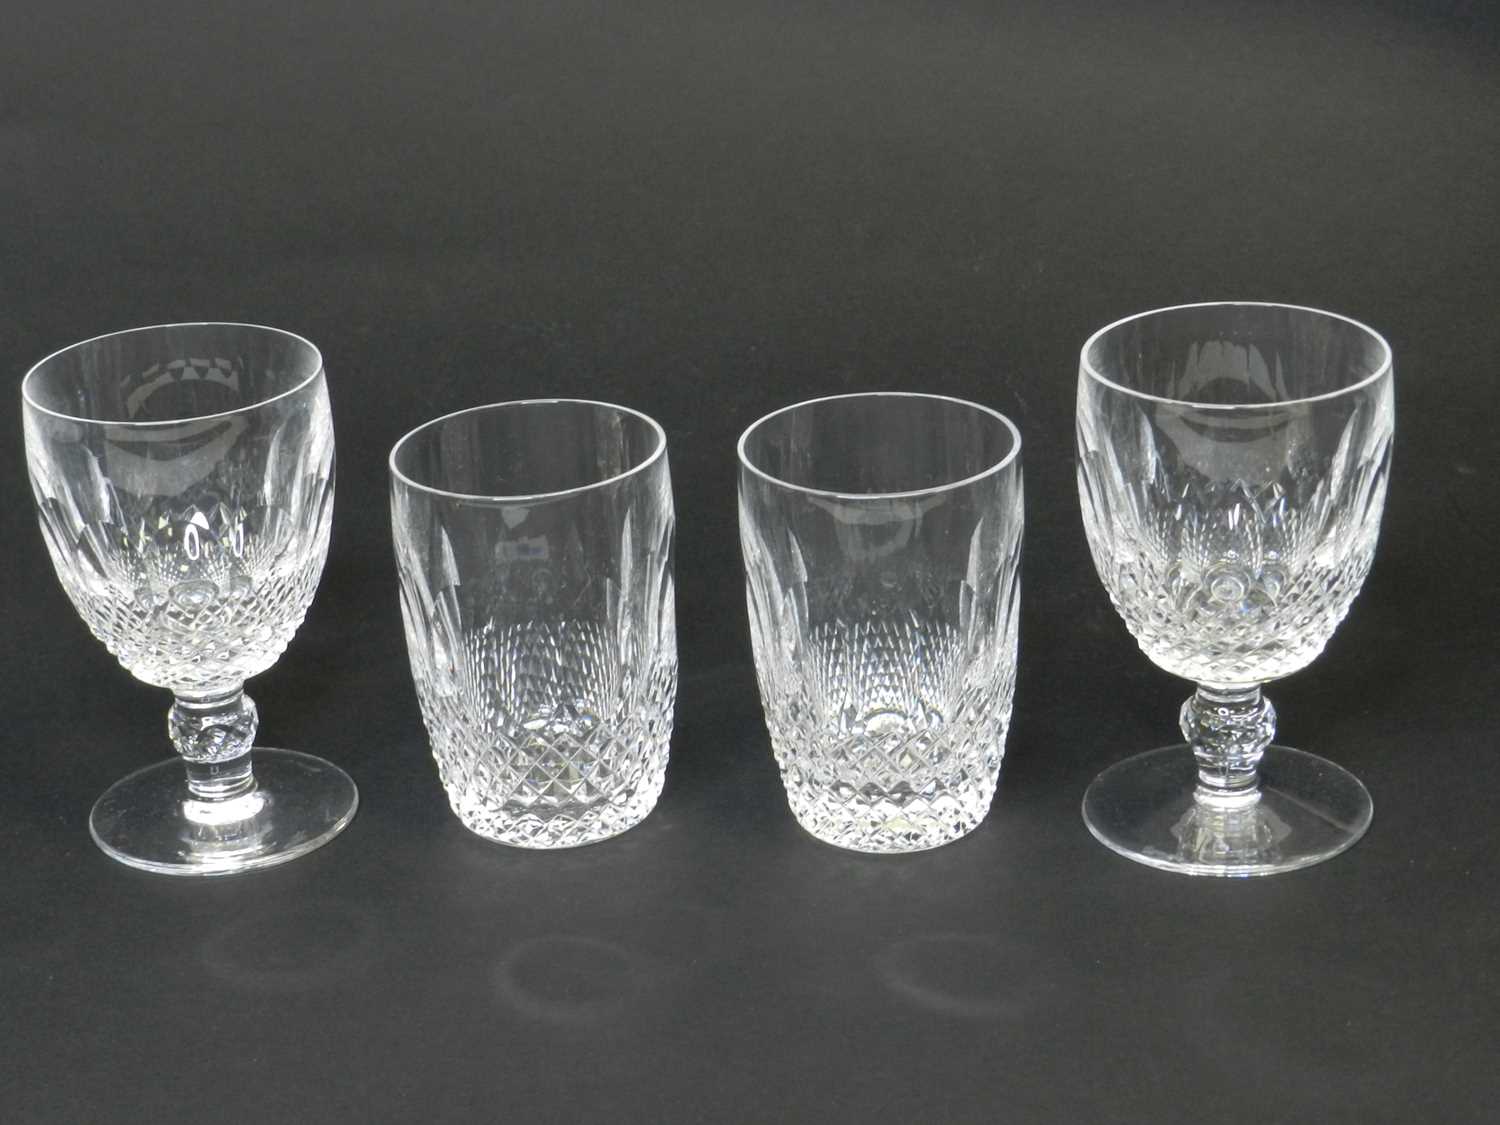 A large suite of Waterford Crystal in the Colleen pattern